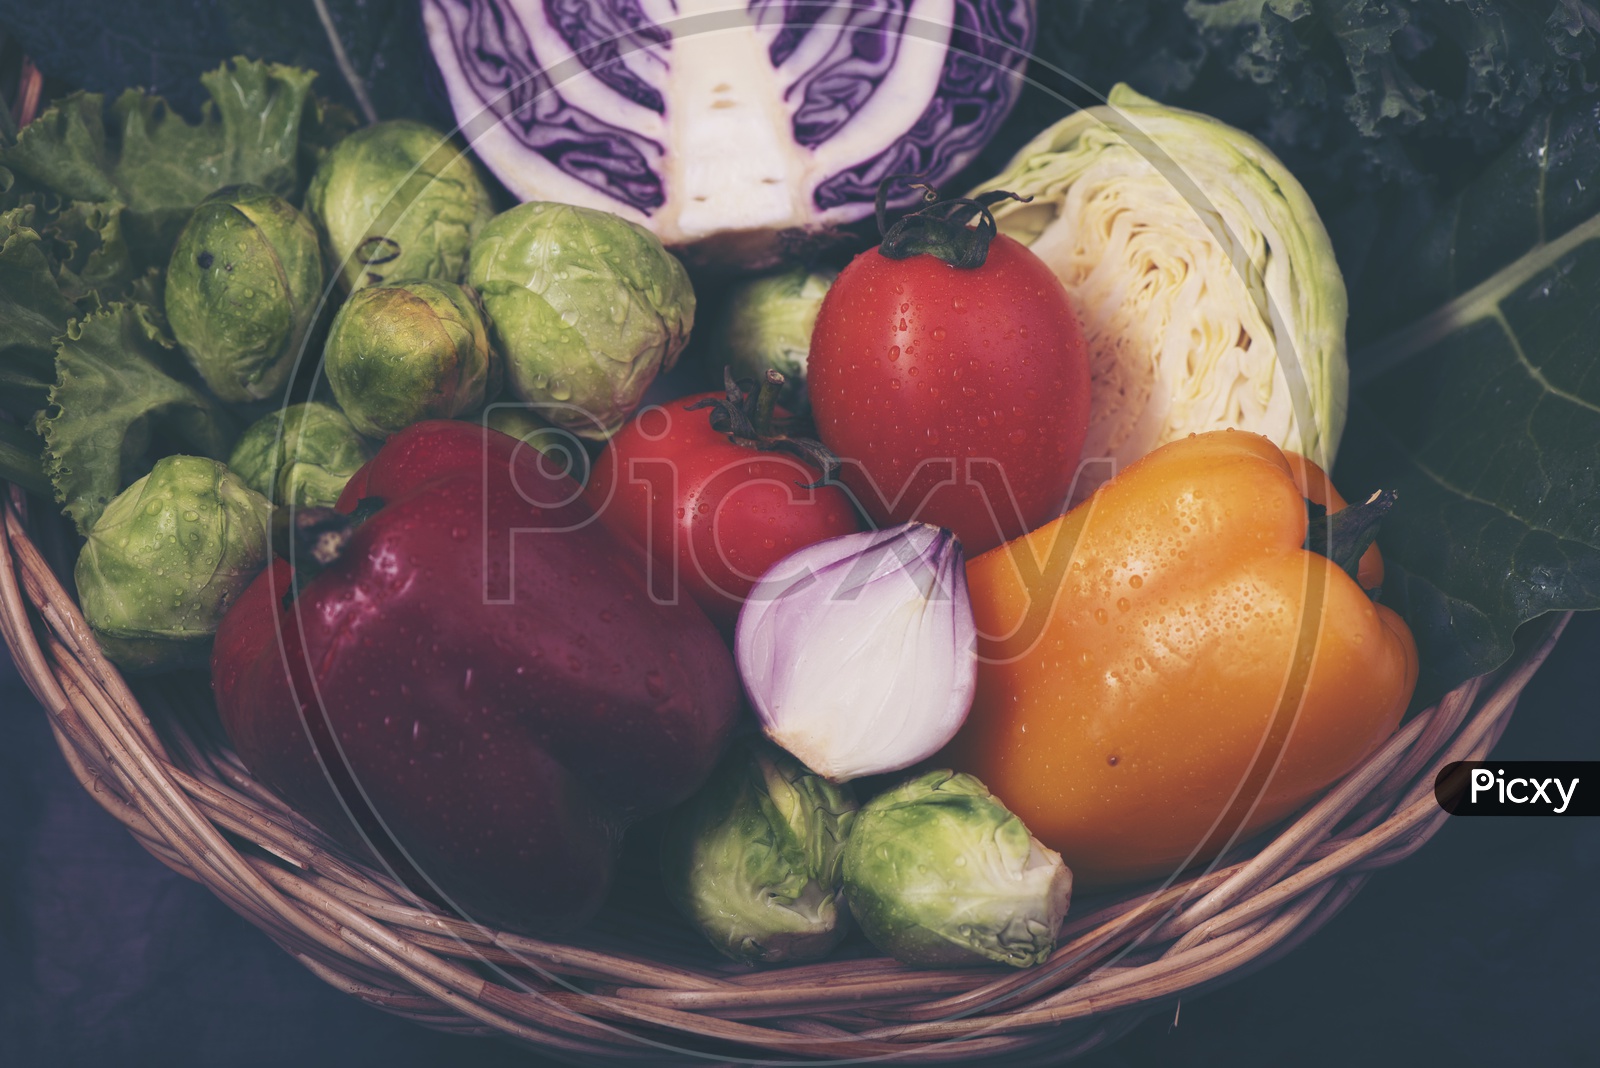 Various kinds of colorful vegetables